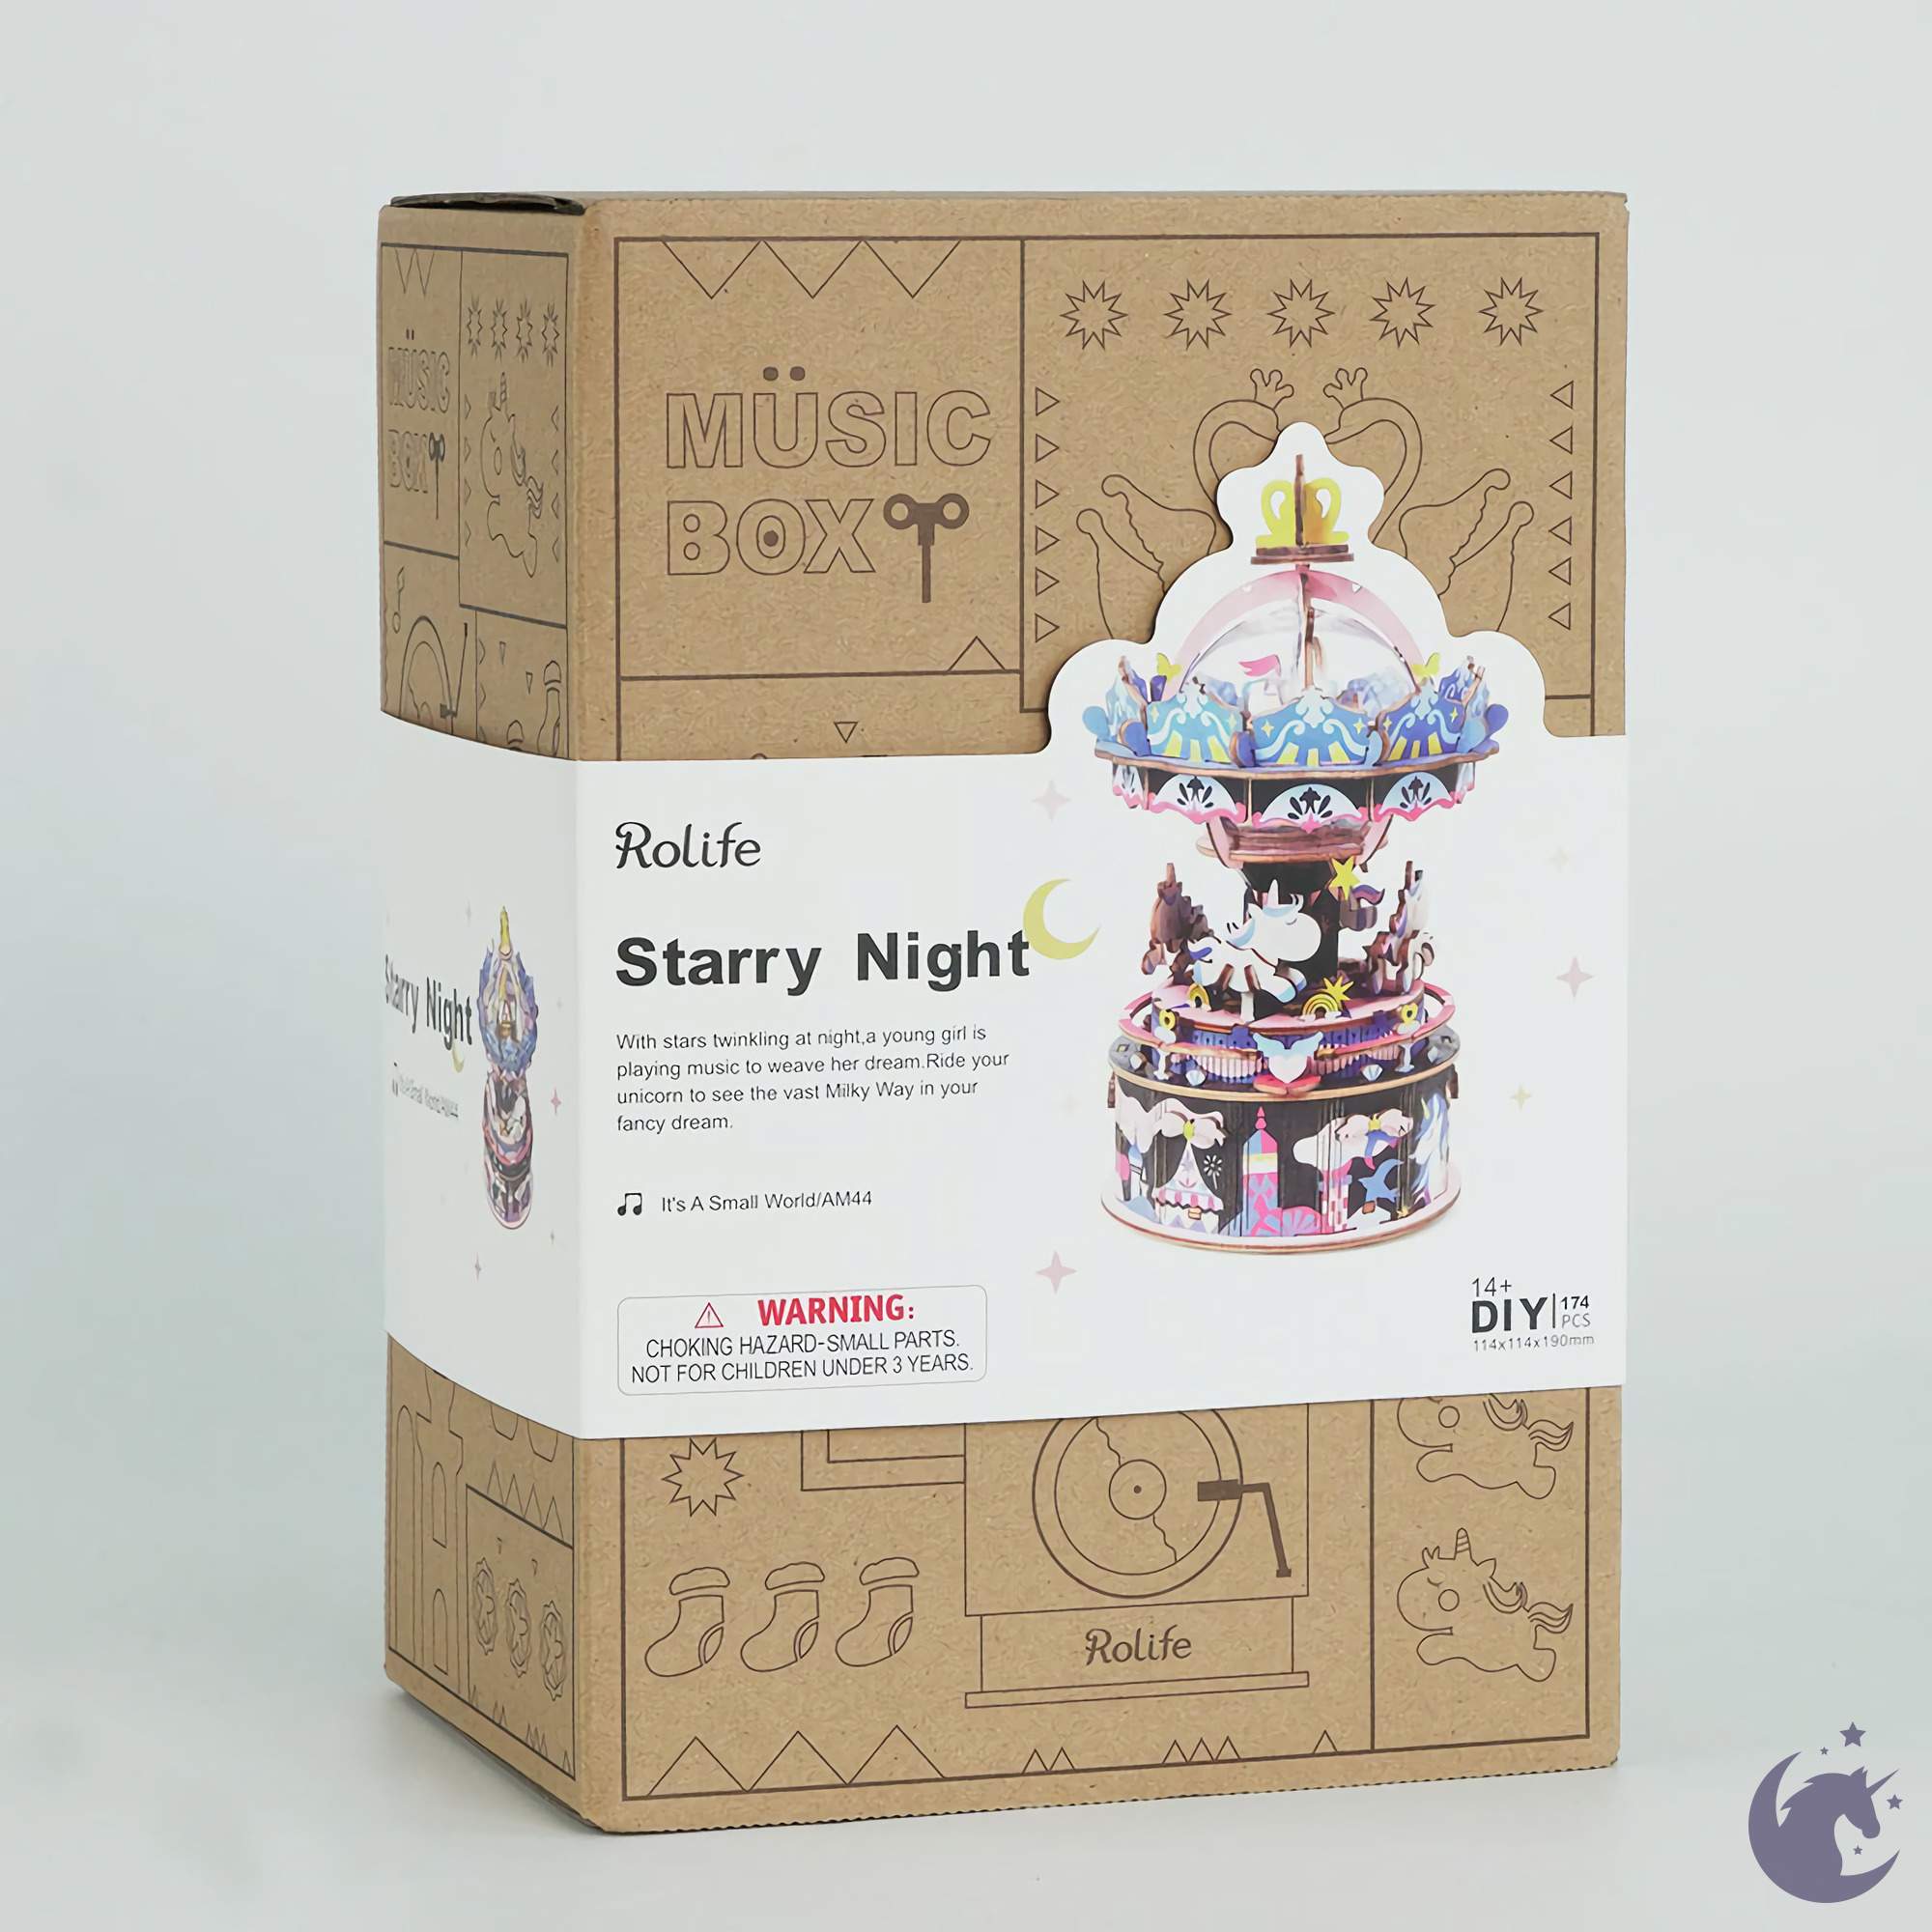 playwithunicorn_diy_robotime_rolife_am_44_starry_night_educational_craft_kit_wooden_puzzle_toys_0_0793afef-646a-4a7c-9c15-4757889a516f.jpg